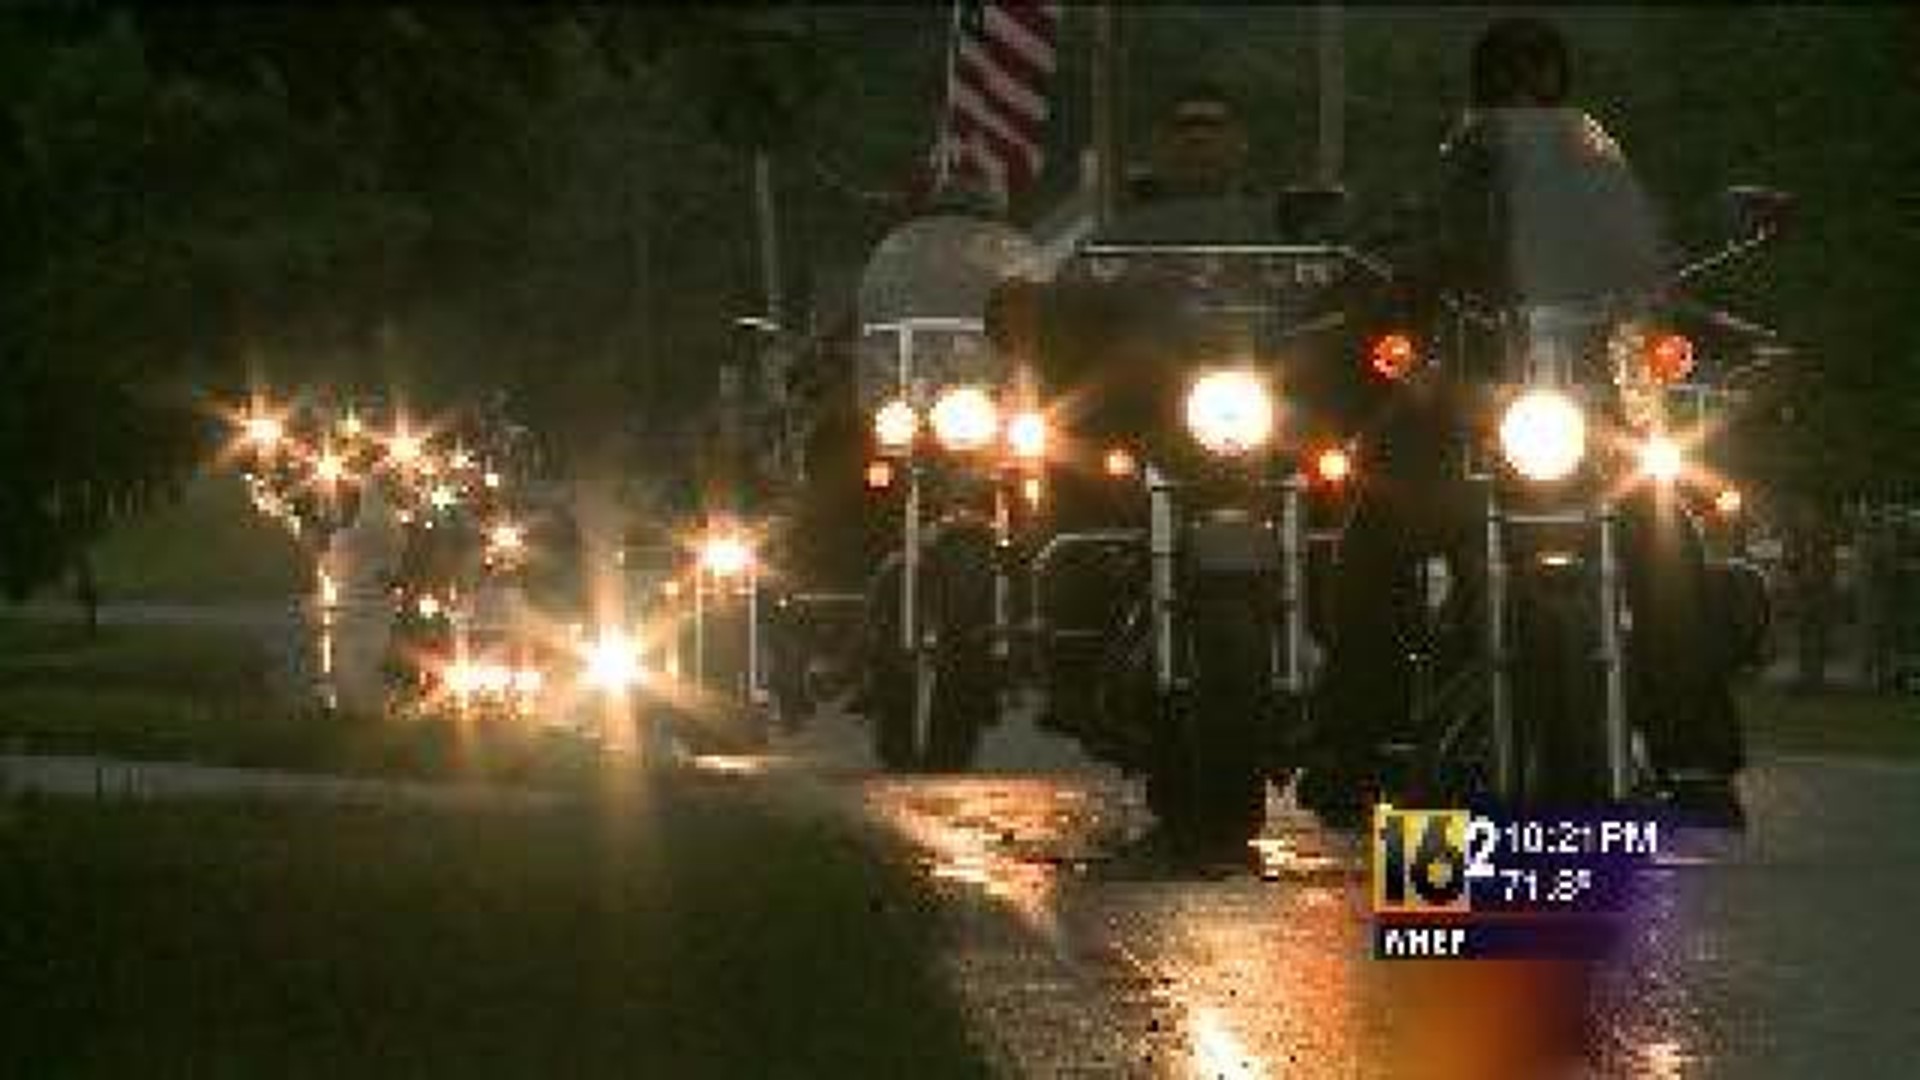 3,000 Motorcyclists Ride For 9/11 Rememberance